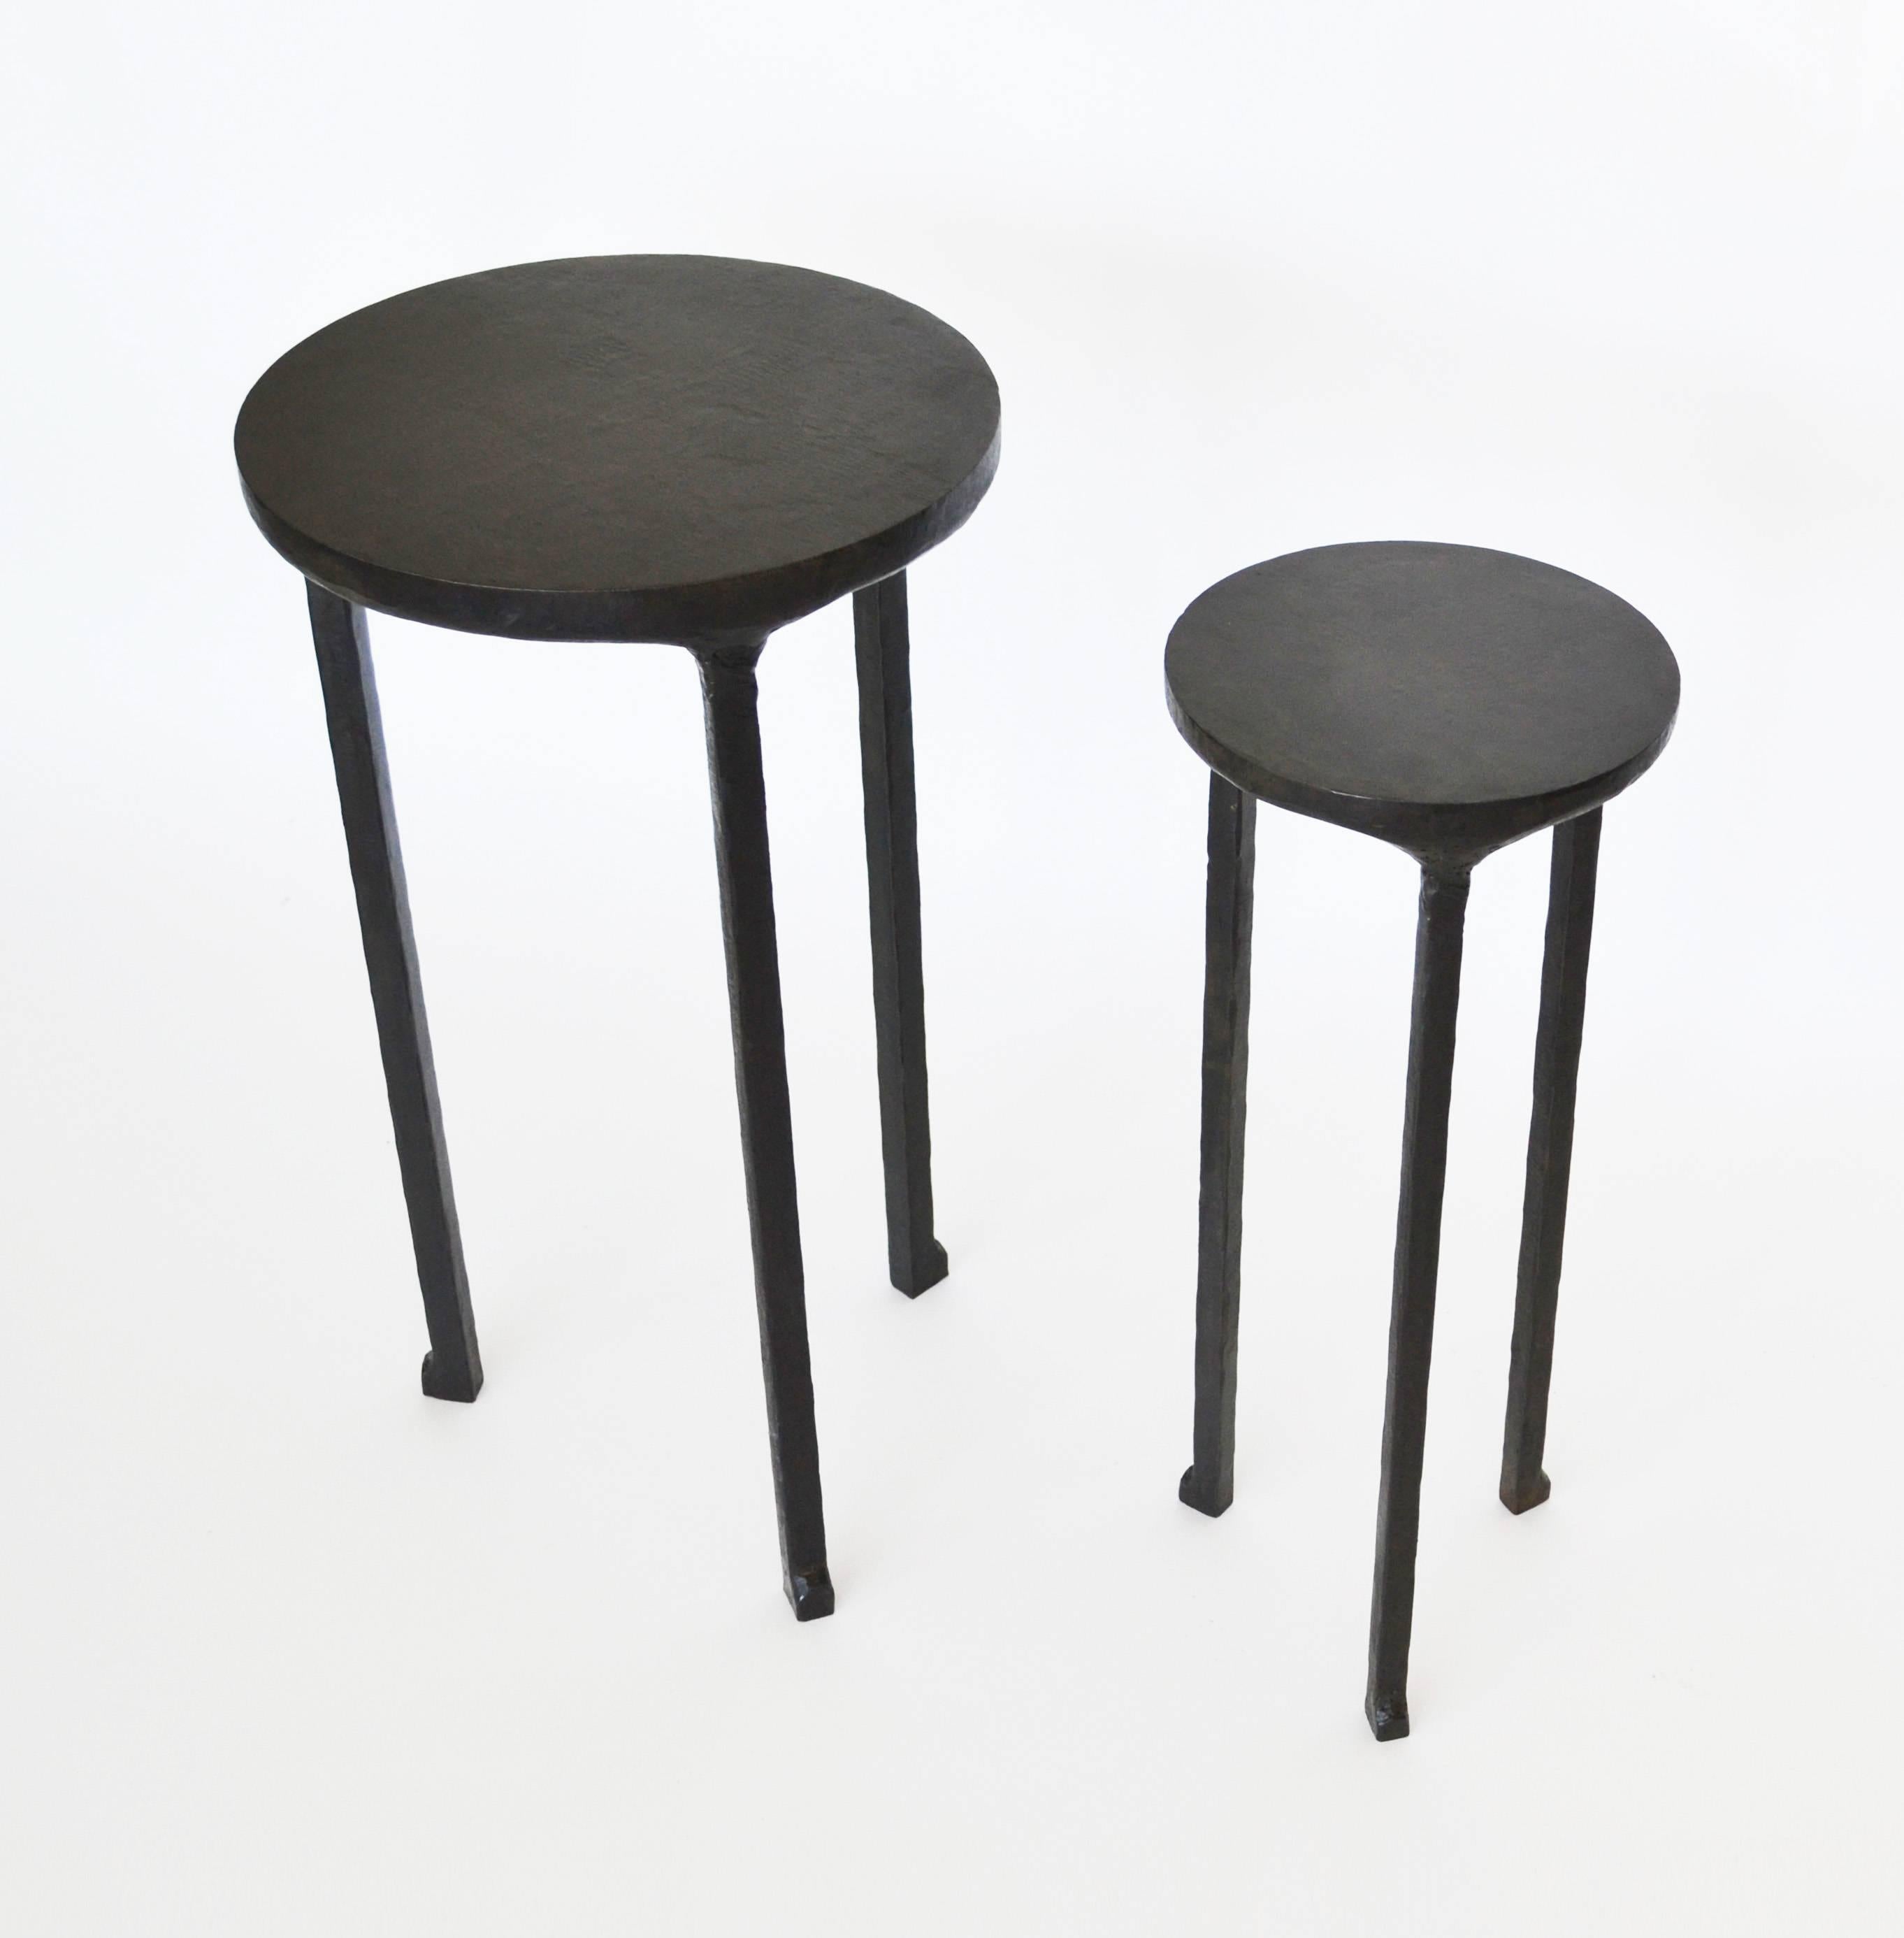 TABLE NO. 3 - Nesting Pair
J.M. Szymanski
d. 2017

These handcrafted side tables were designed to interact and live with one another. They can nest within each other or live separately. Each table is hand carved form blackened steel. 

Custom sizes